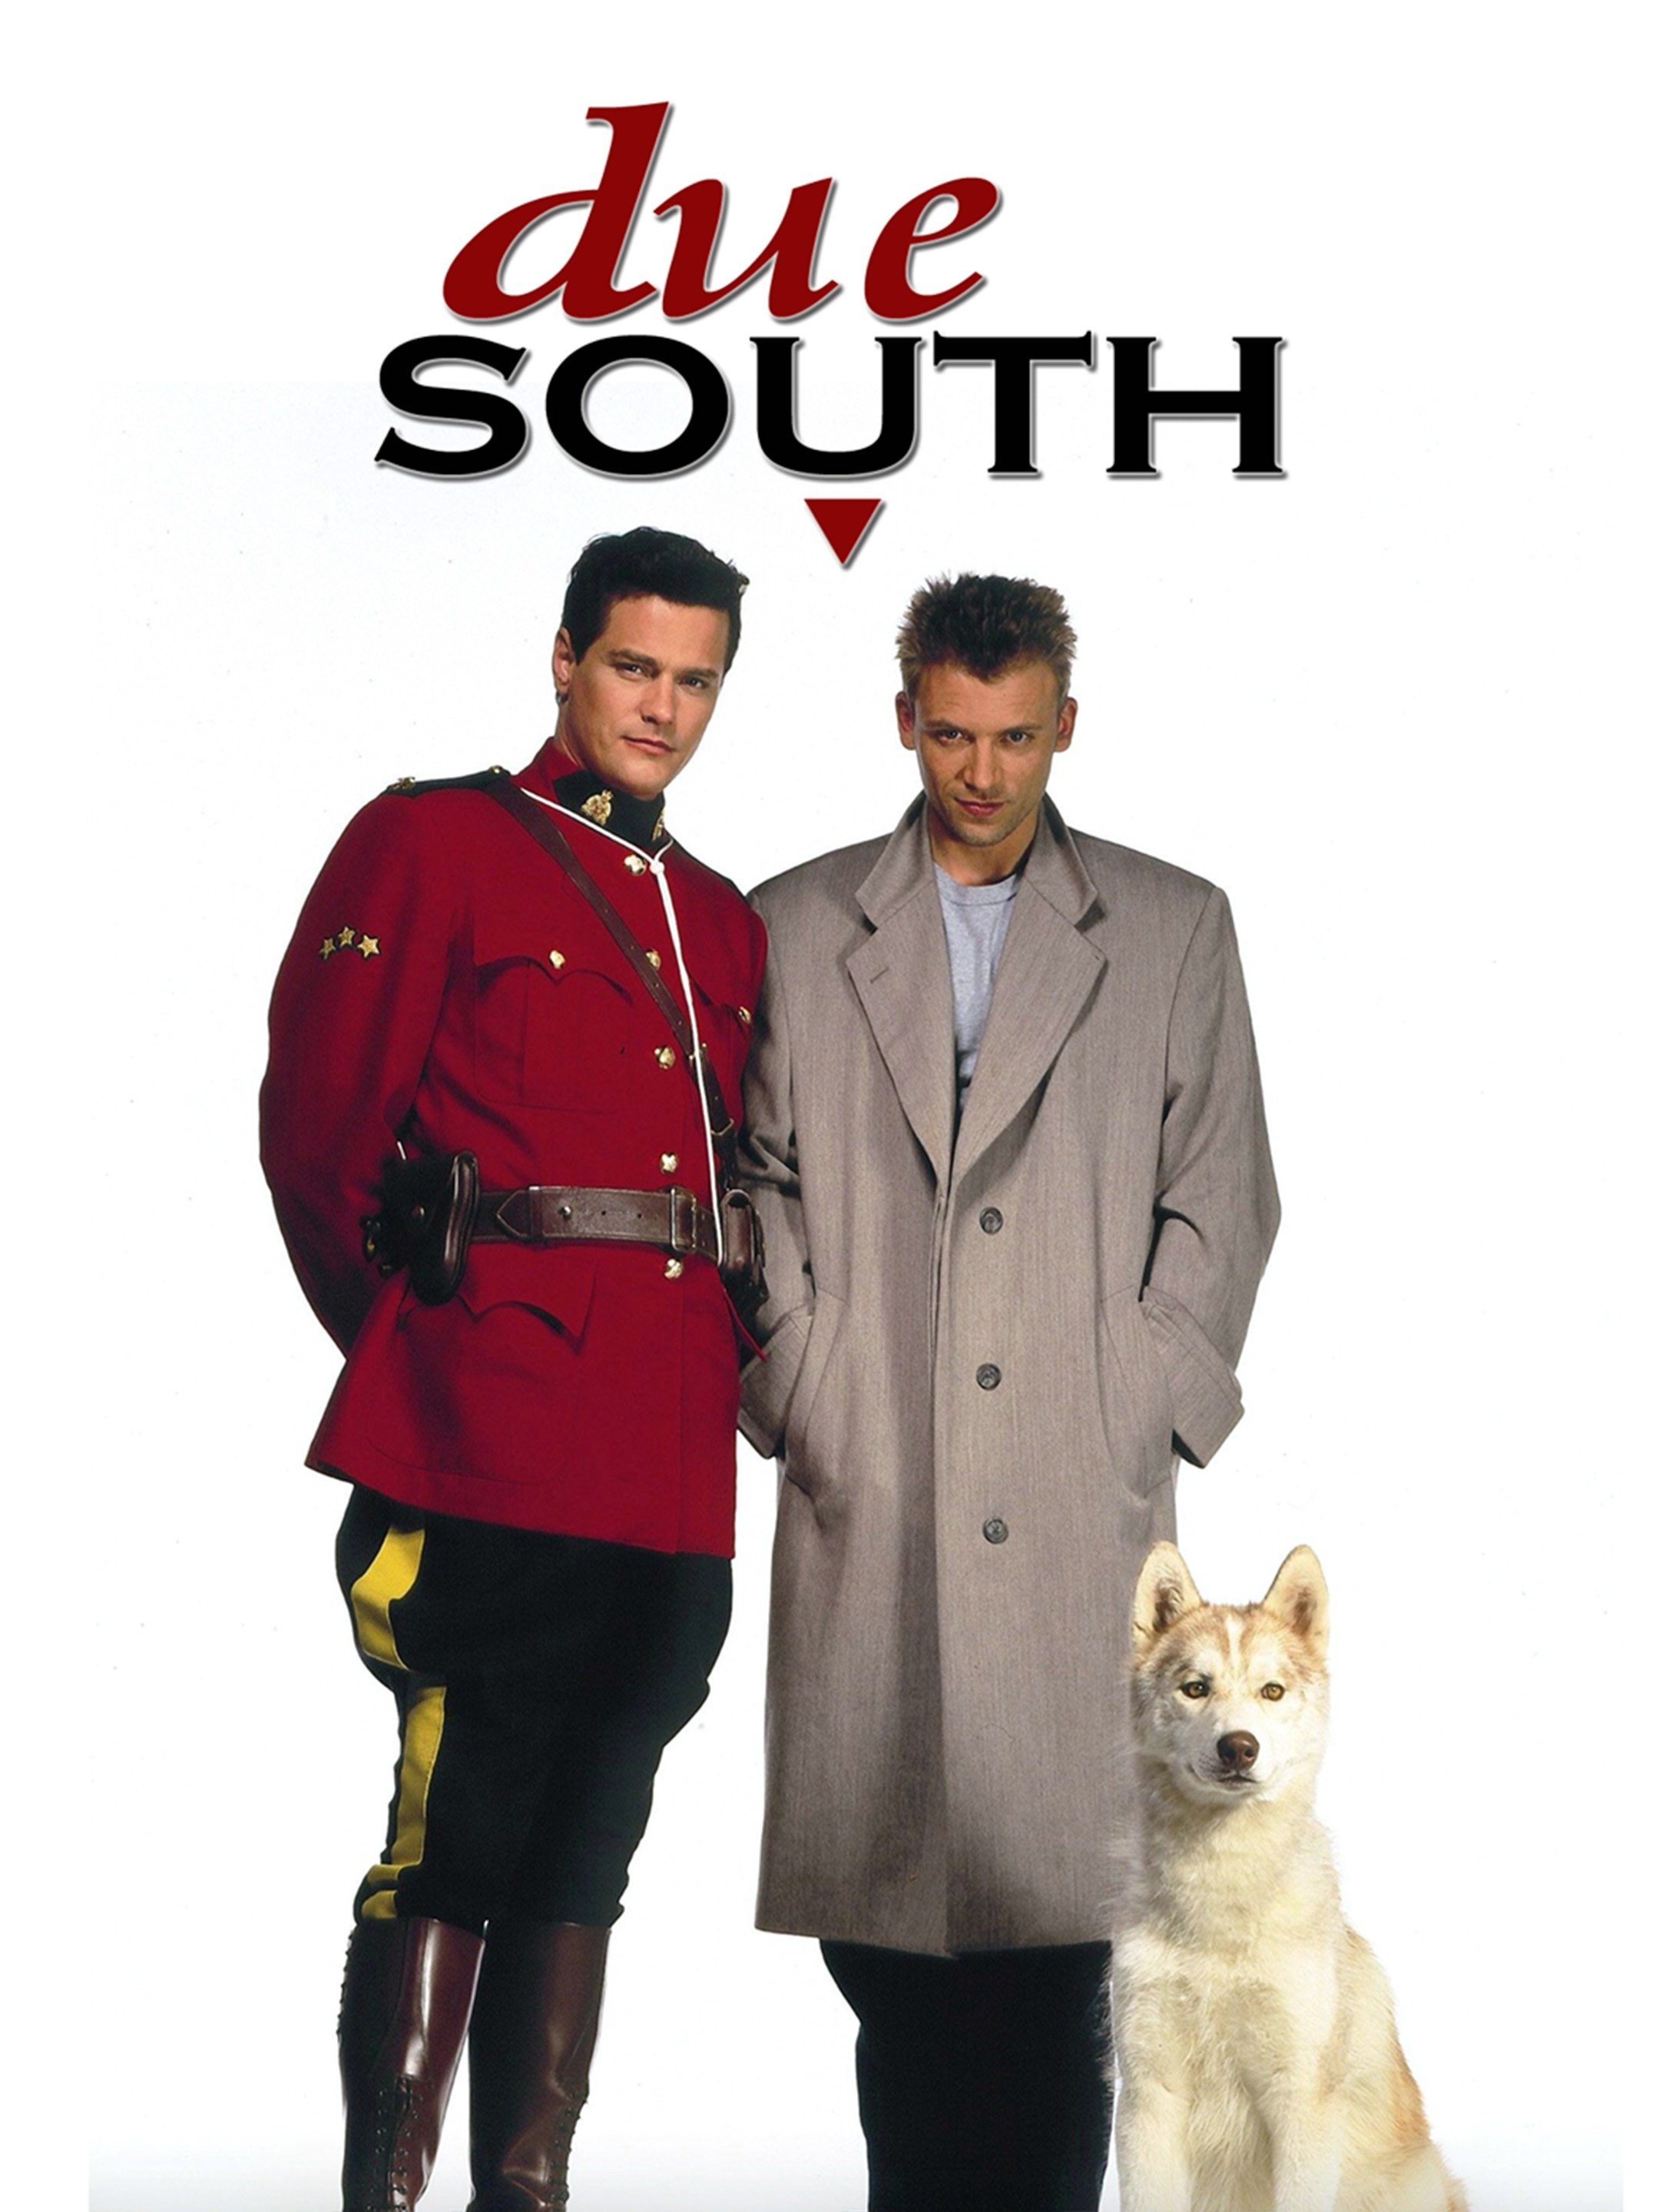 Due South Rotten Tomatoes